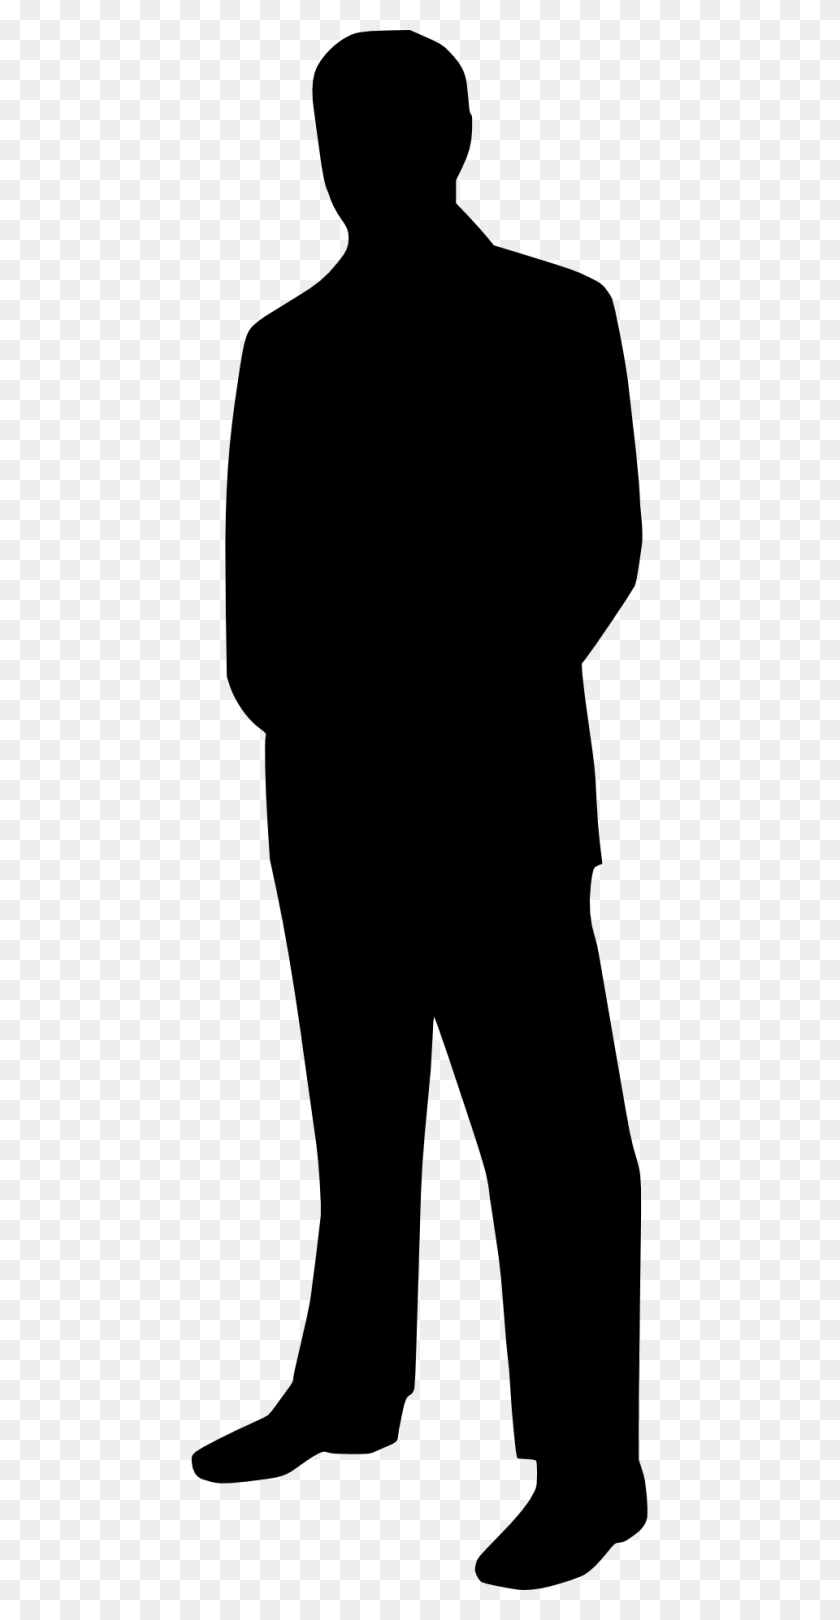 960x1920 Business Man Tie Suit Black White Silhouette Free Image - Man In A Suit PNG